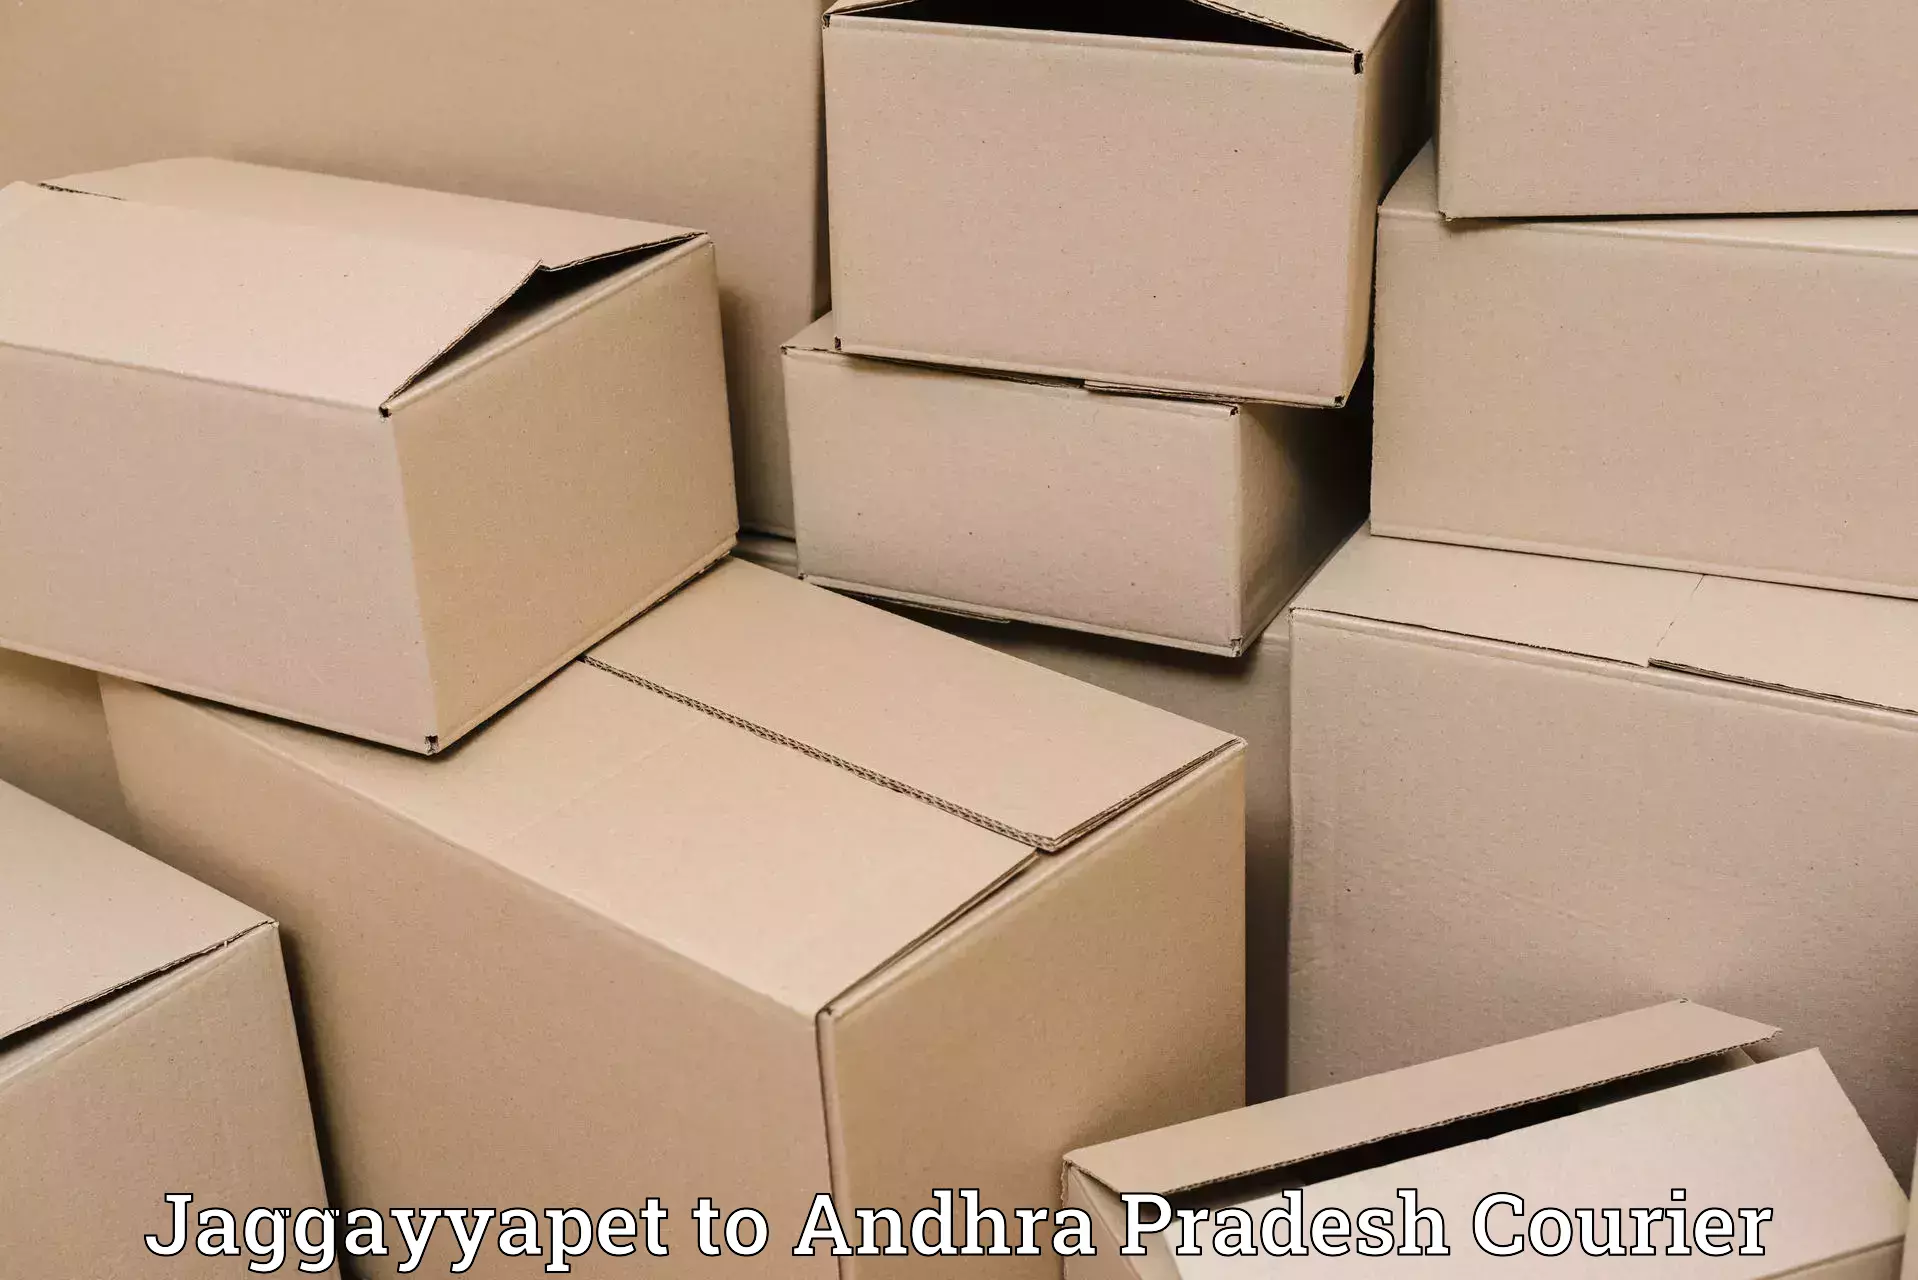 Nationwide courier service in Jaggayyapet to Visakhapatnam